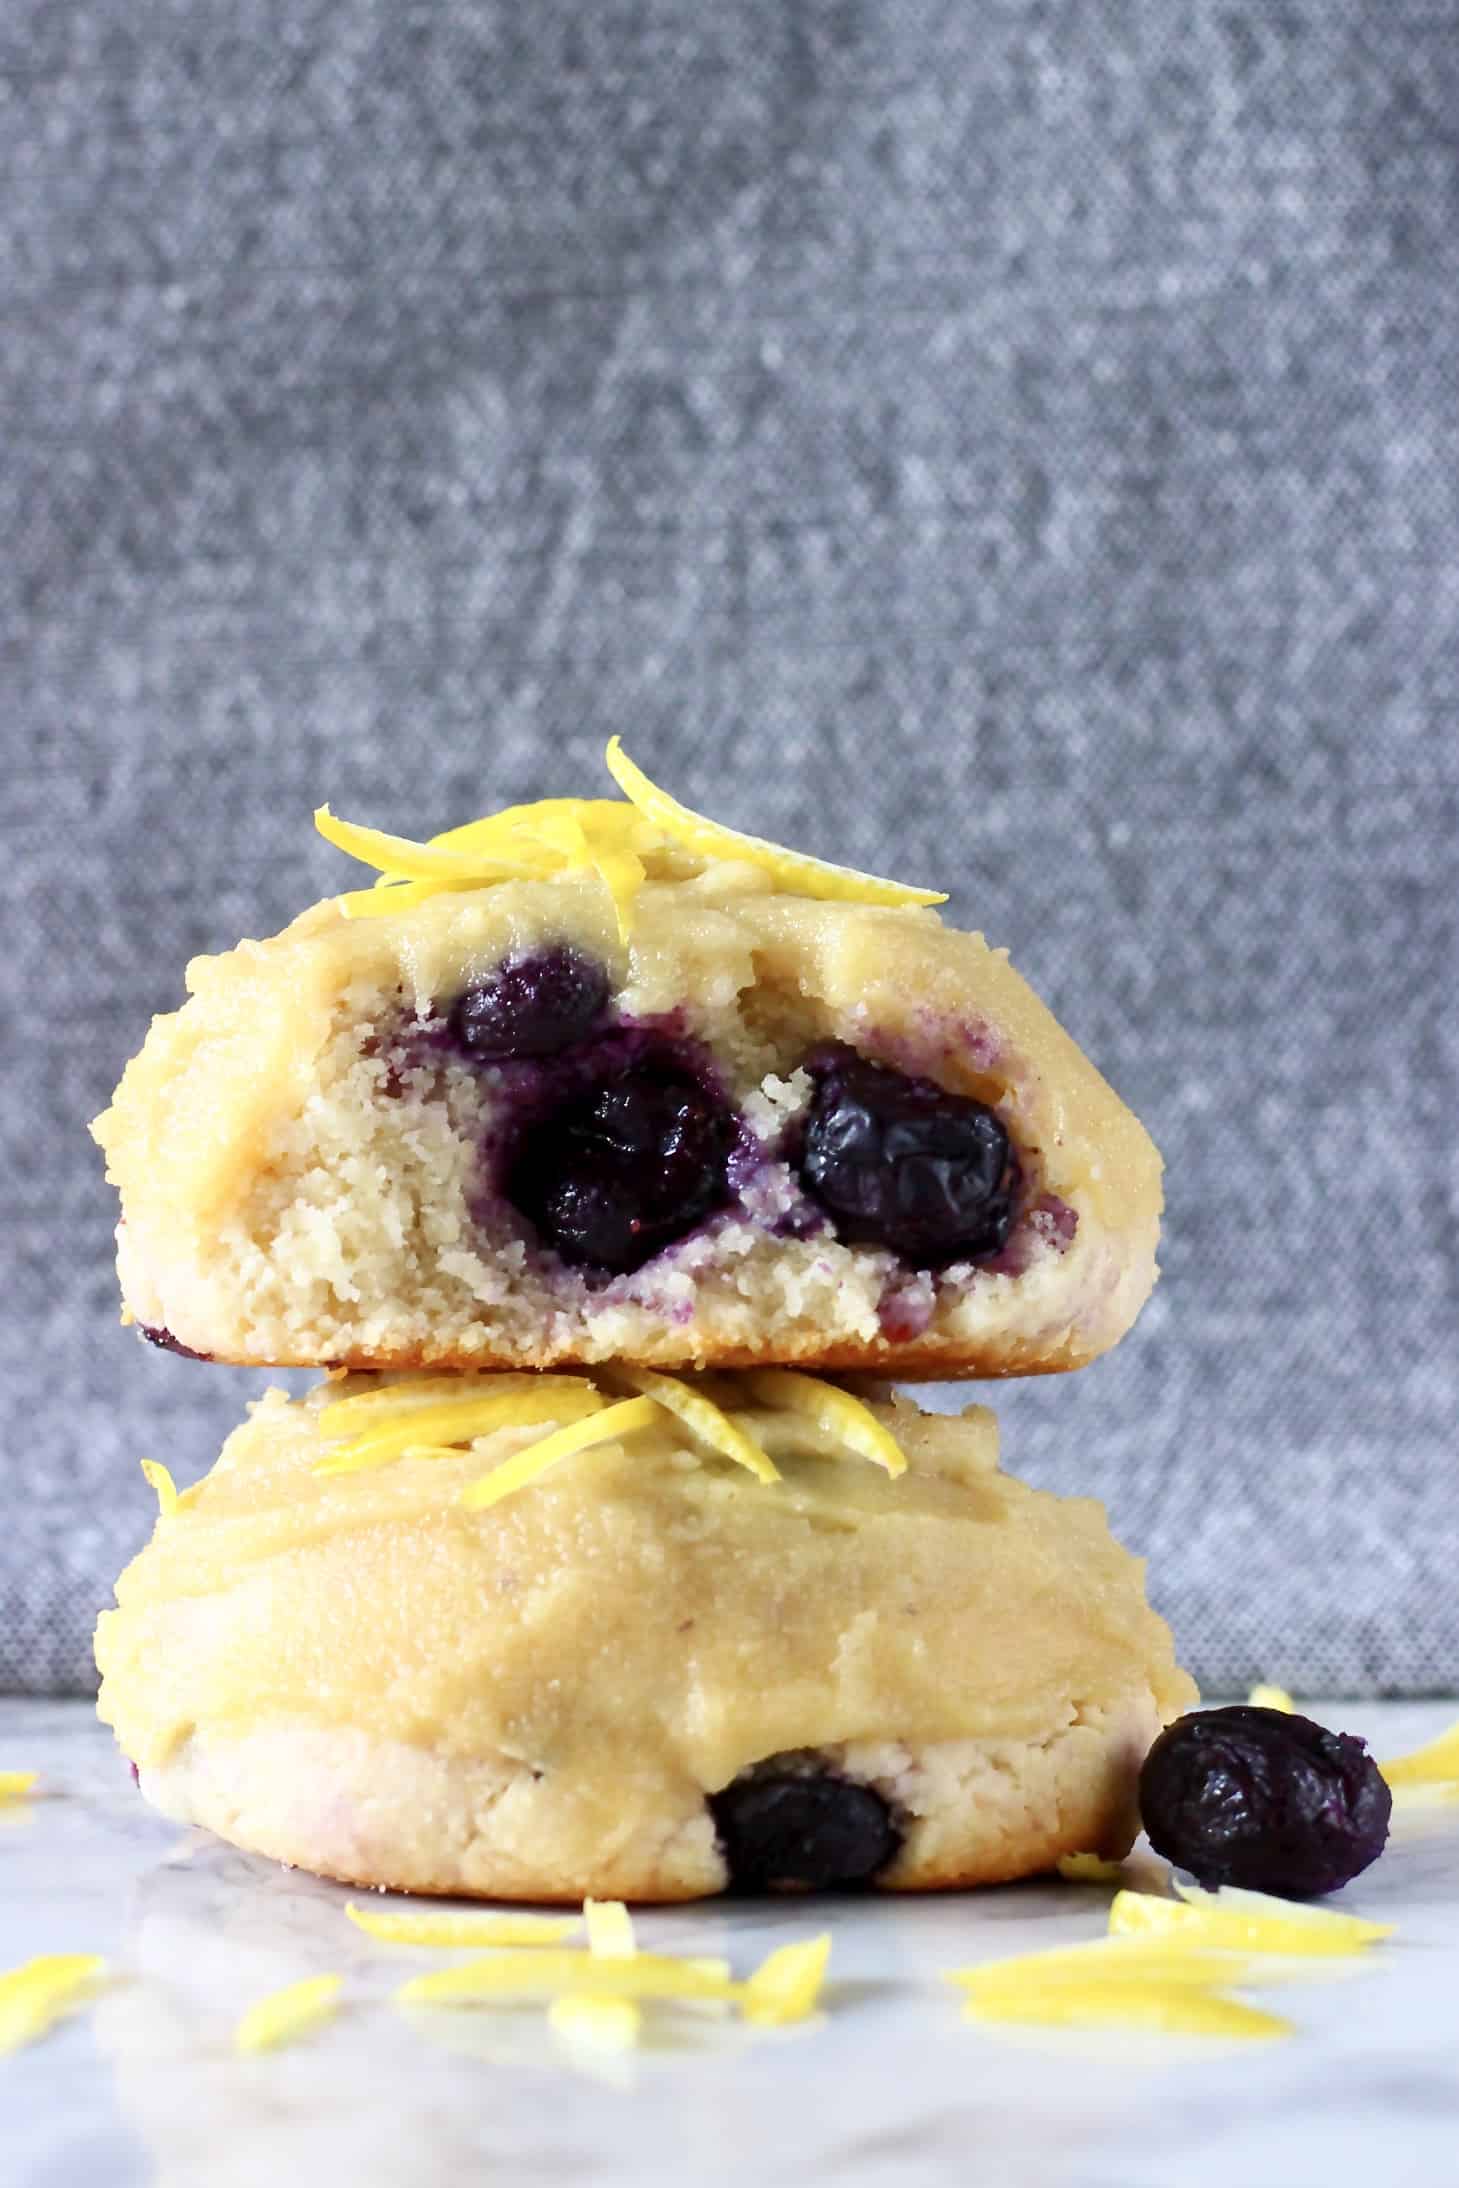 Two gluten-free vegan lemon blueberry cookies stacked on top of each other with a bite taken out of one